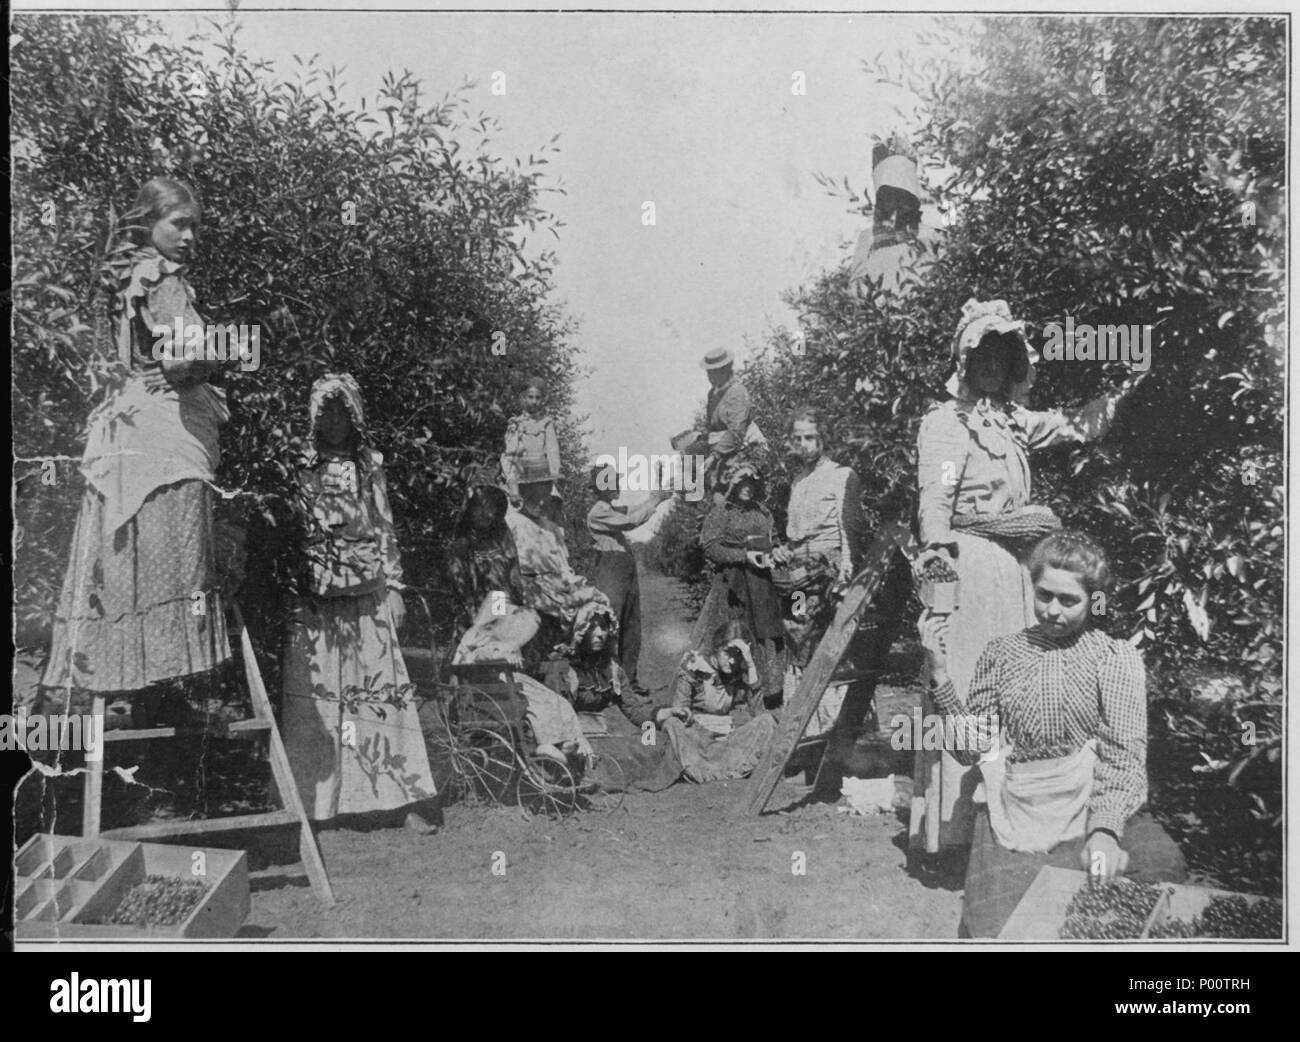 Picking cherries on an Oklahoma Fruit Ranch. A baby in a stroller watches the busy family at work, ca. 1900. Copy of h - Stock Photo